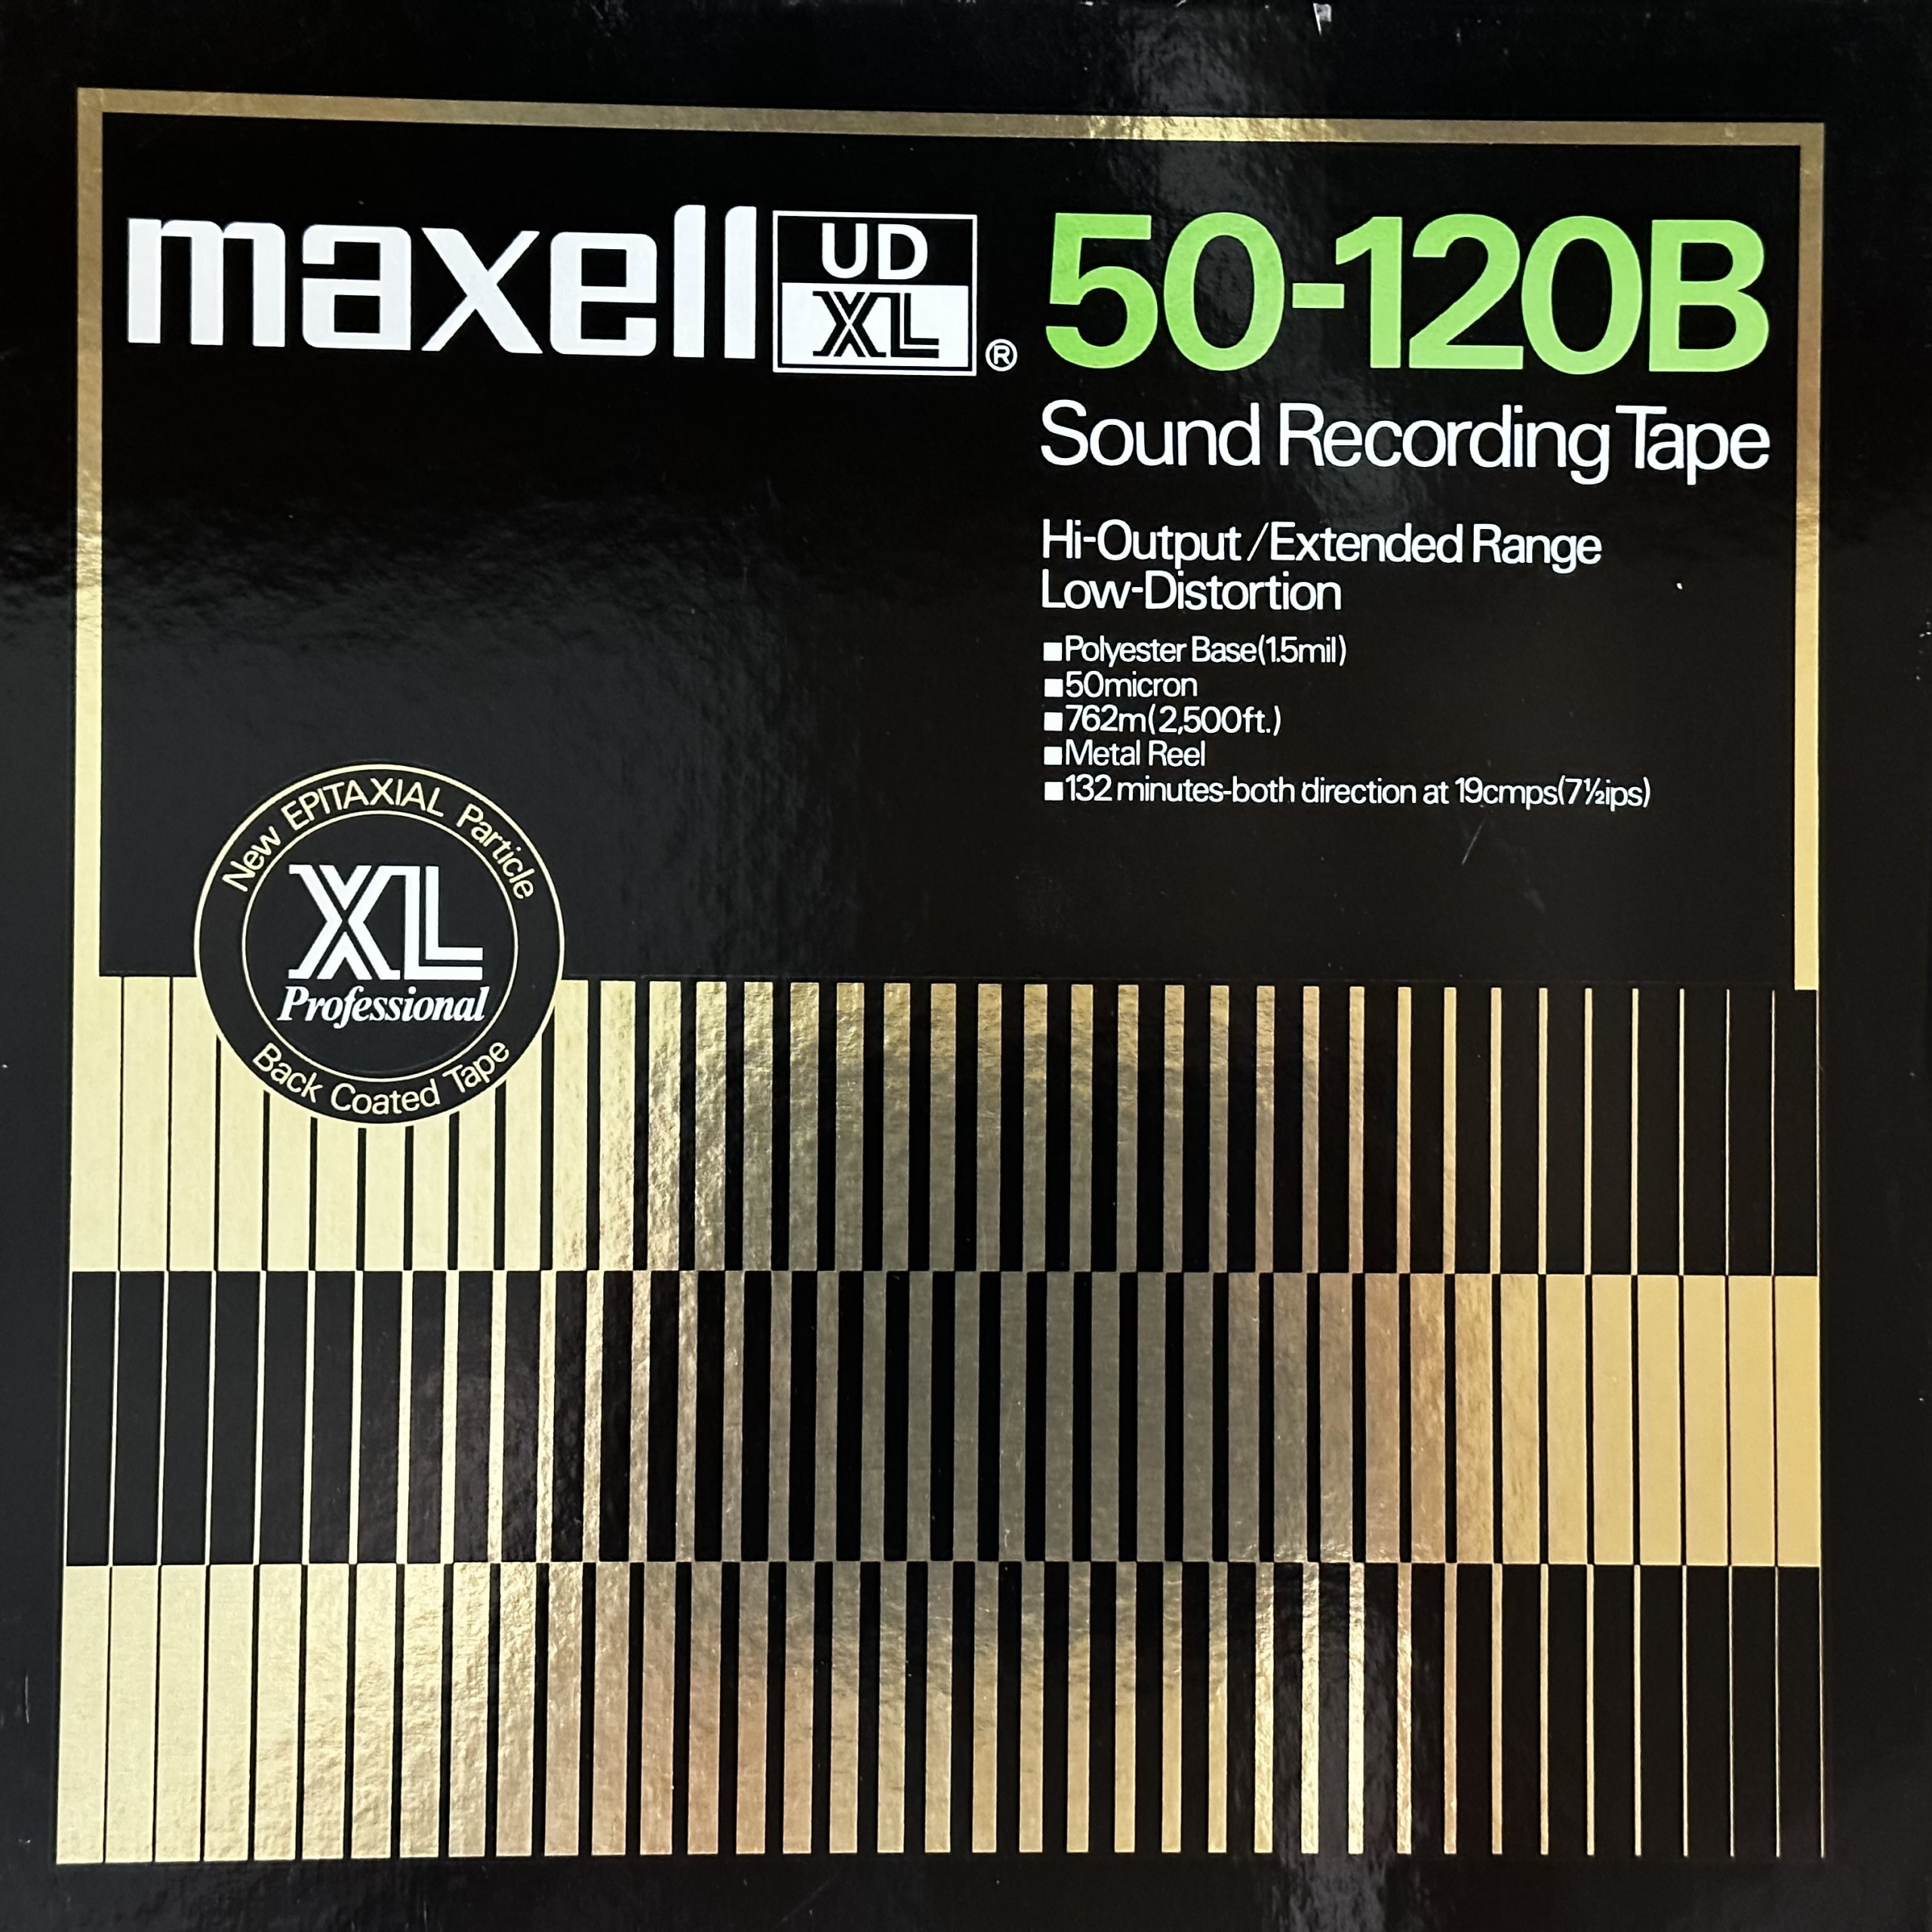 Maxell UDXL Reel to Reel Recording Tape, SP, 10 Reel, 2400 ft